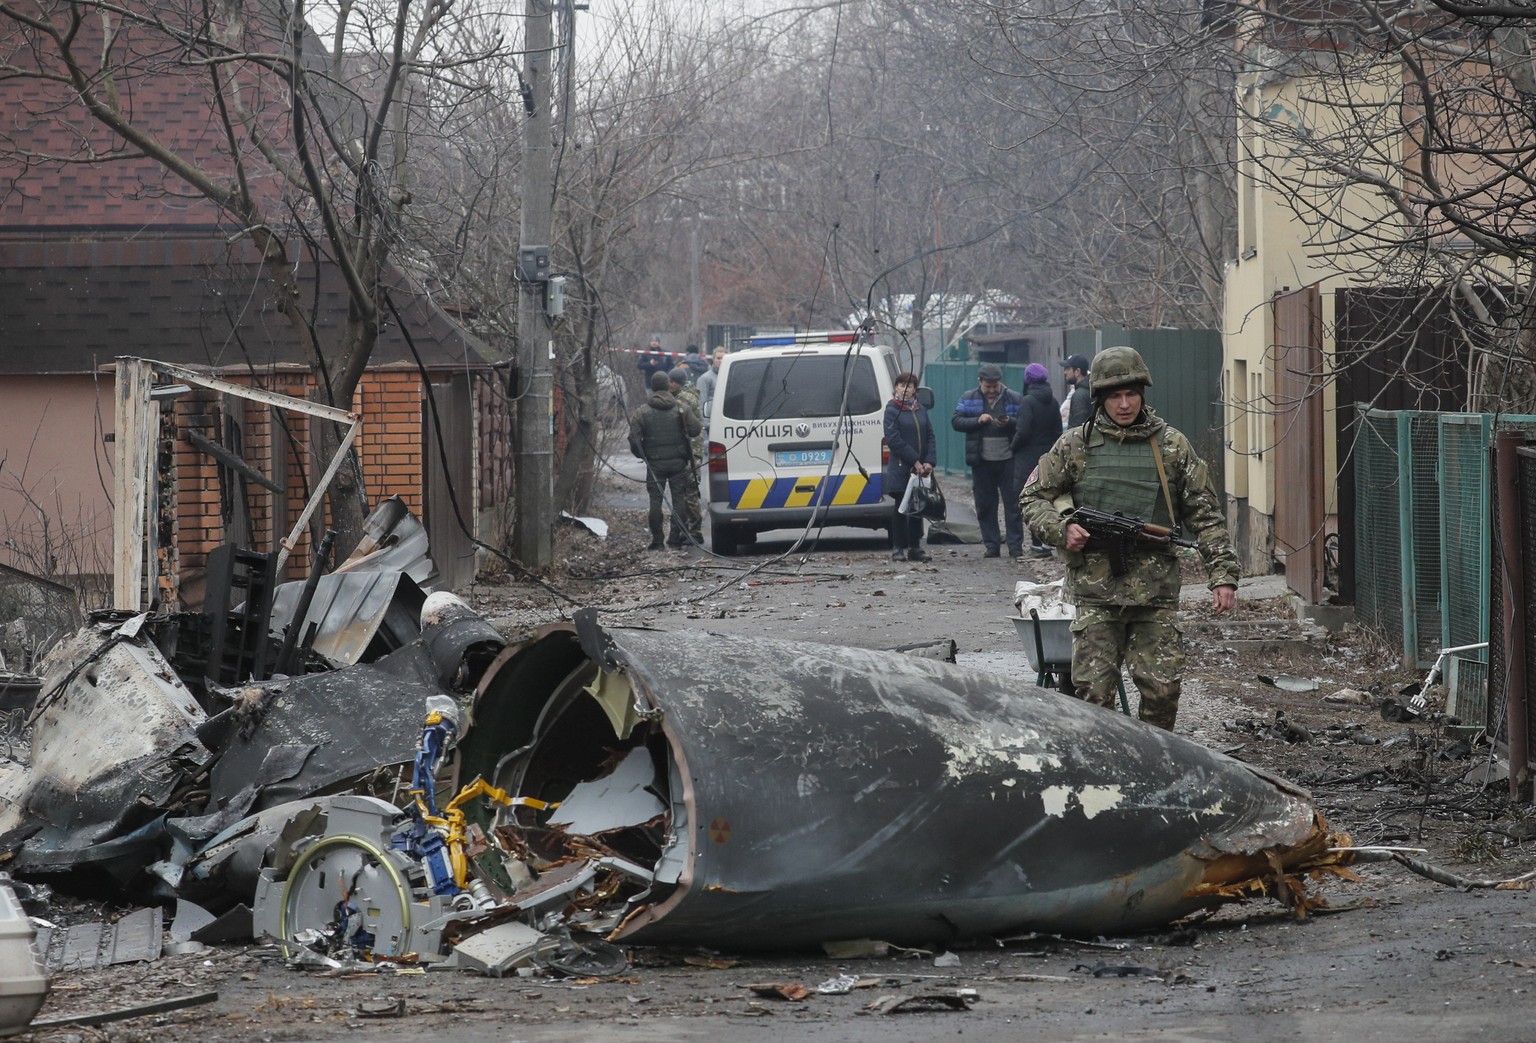 epa09783629 A soldier walks past the debris of a military plane that was shot down overnight in Kiev, Ukraine, 25 February 2022. Russian troops entered Ukraine on 24 February prompting the country&#03 ...